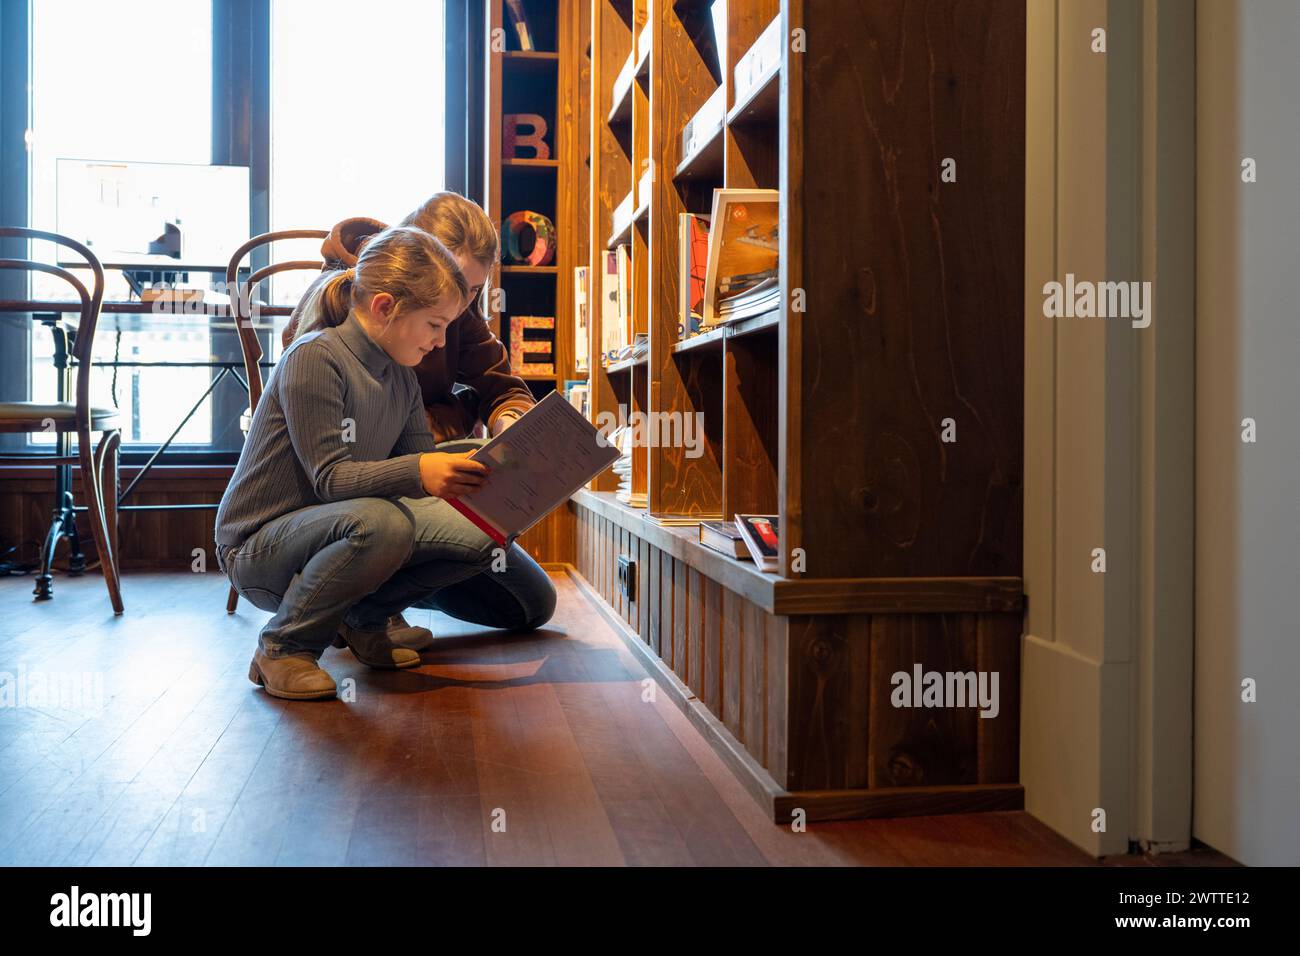 Young girl engrossed in reading a book by the bookshelf. Stock Photo